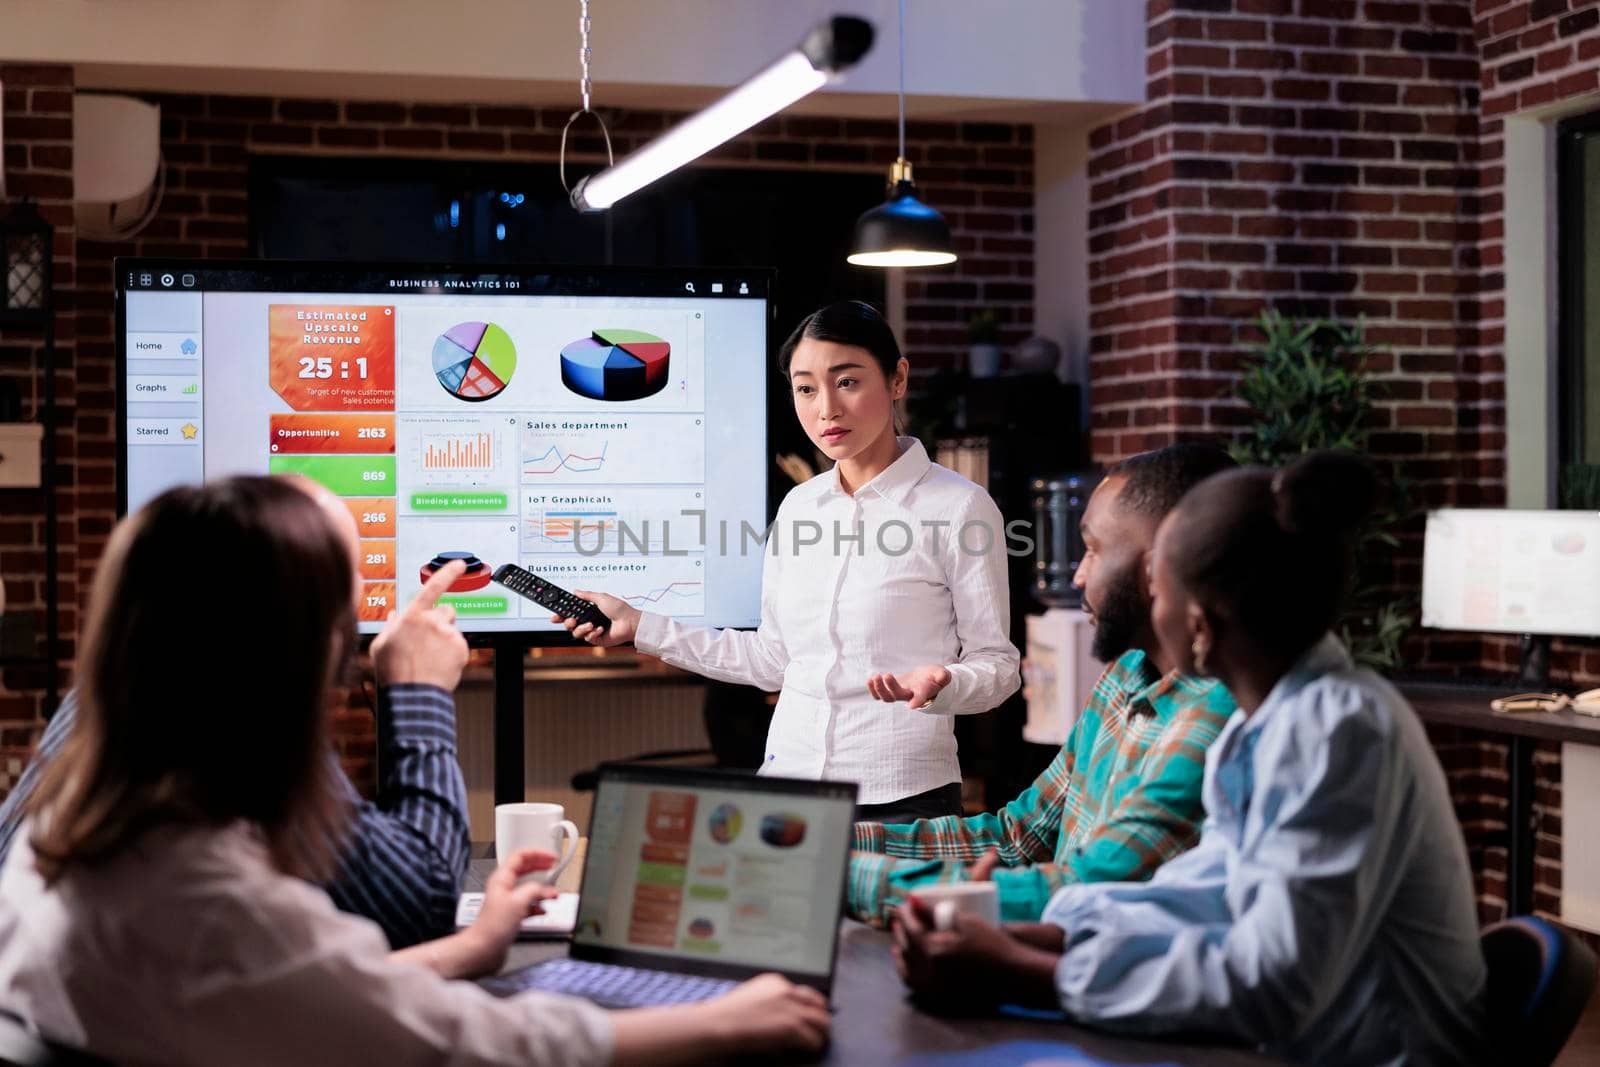 Employee standing in front of team of coworkers presenting sales strategy using remote control in late meeting. Asian woman doing overtime with colleagues in startup office brainstorming strategy.